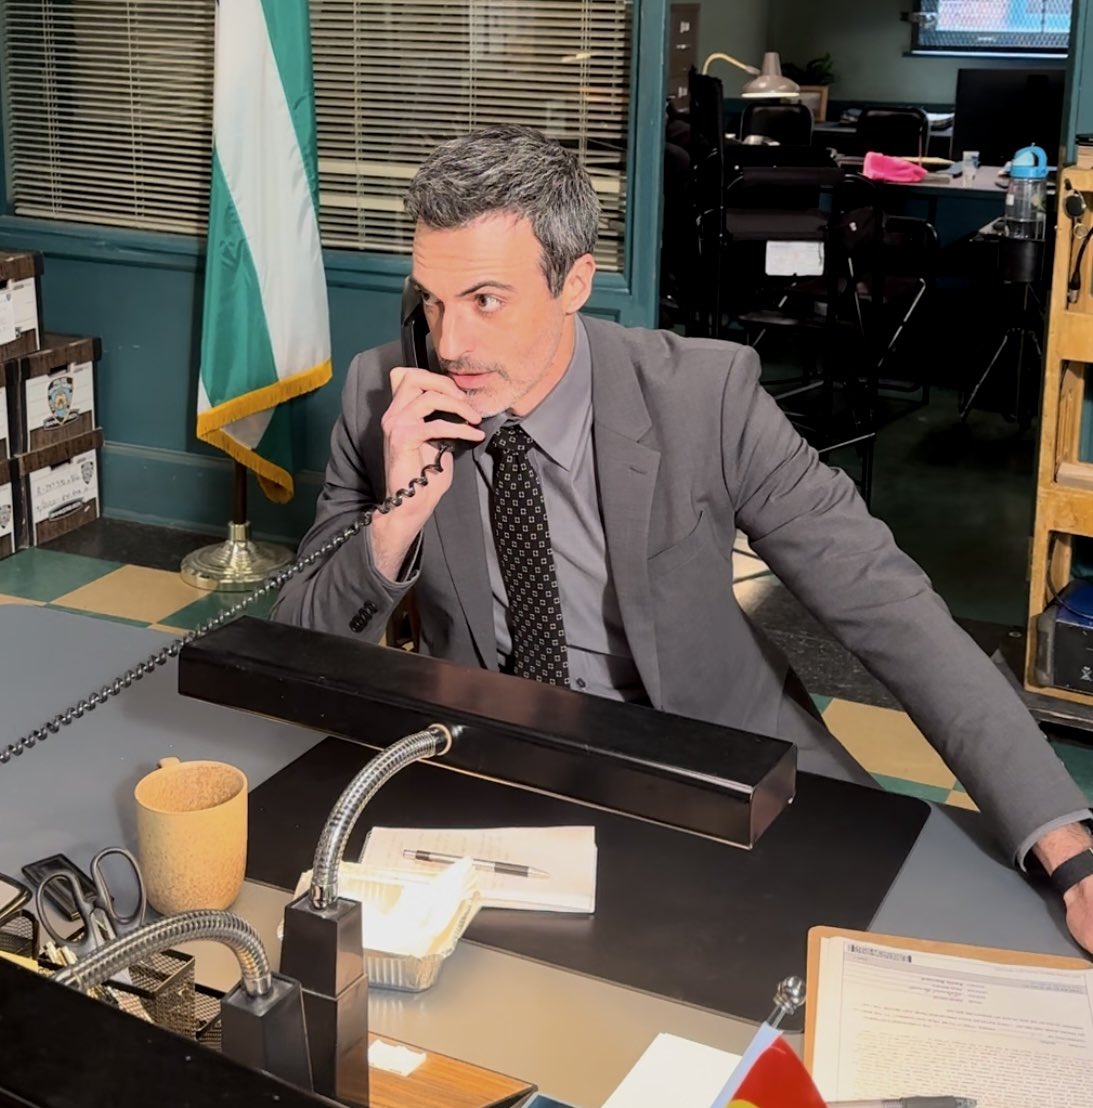 Detective Riley is one call away #LawAndOrder